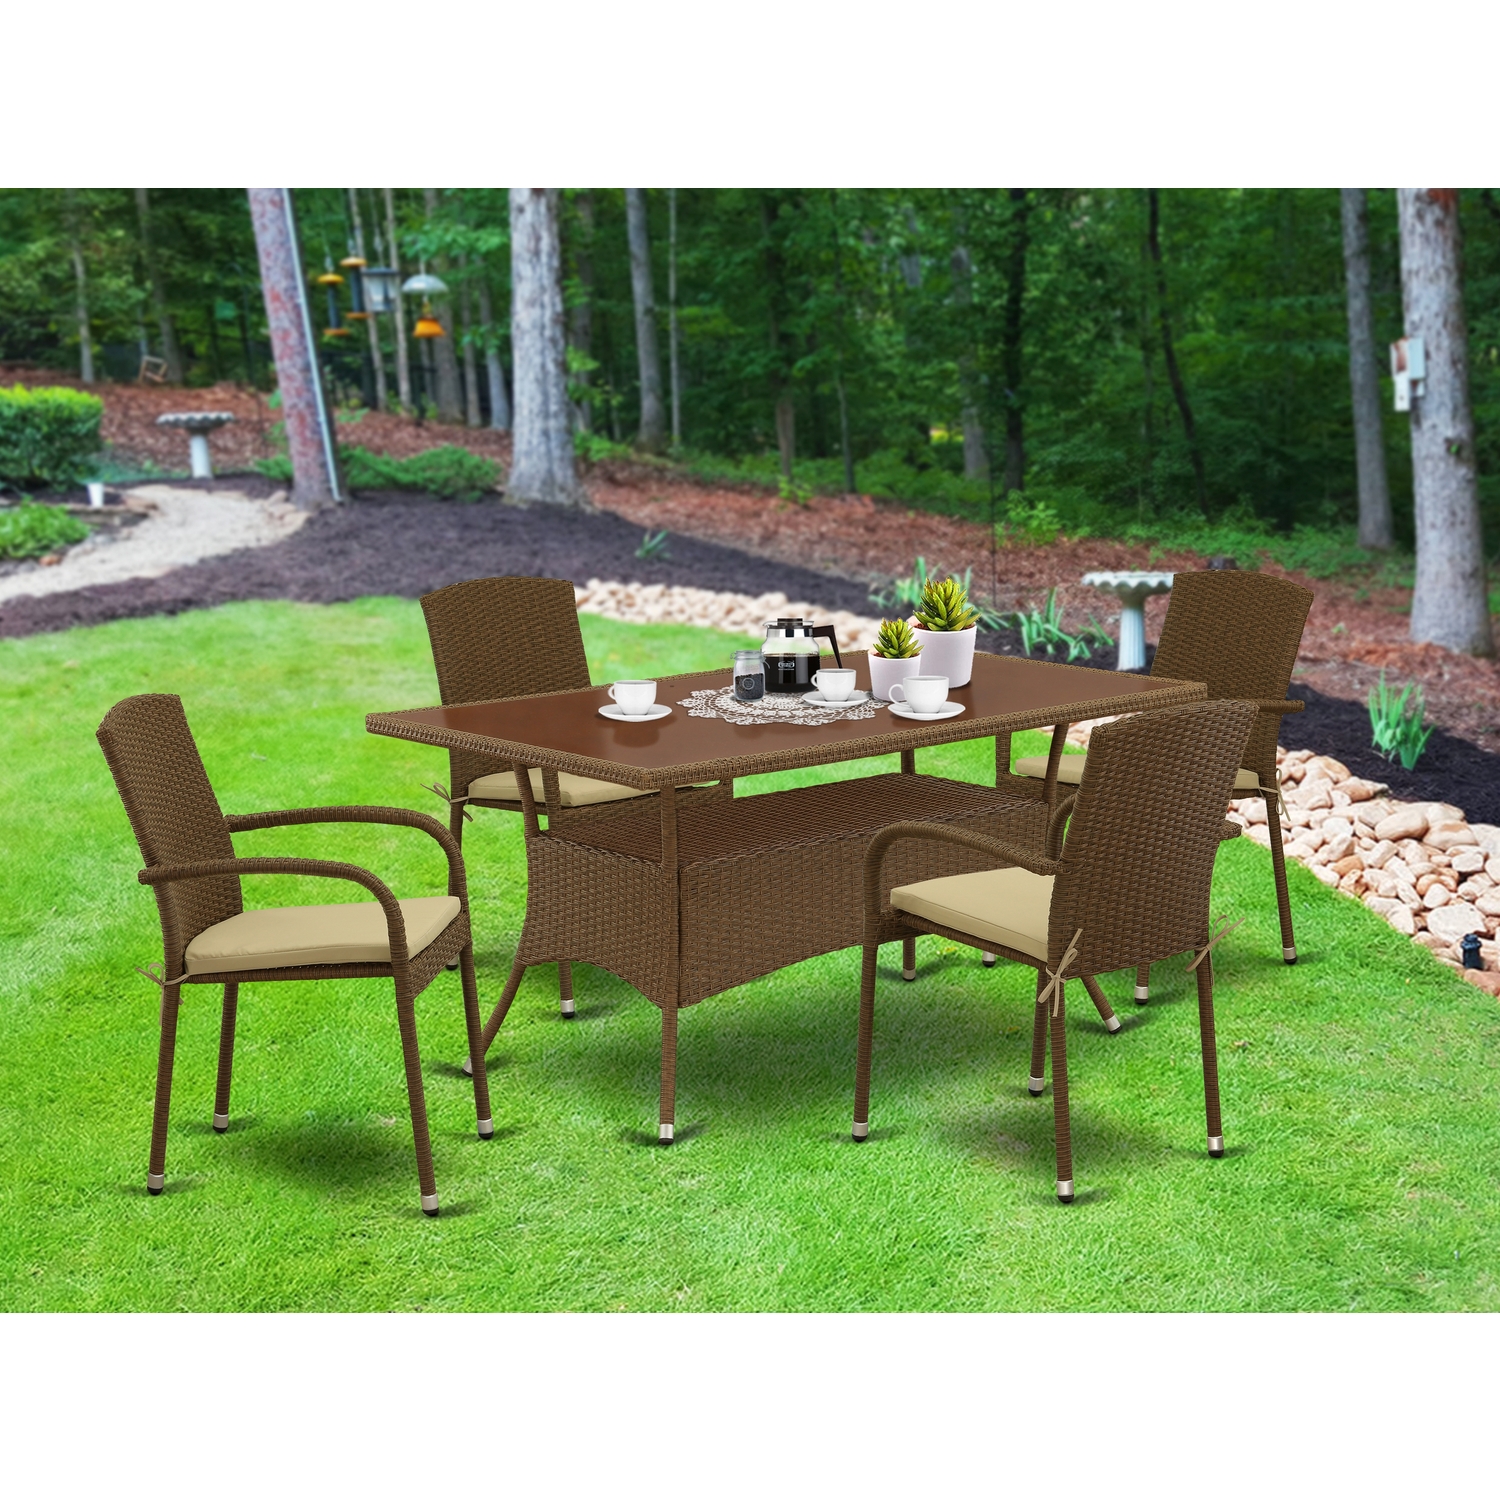 East West Furniture Oslo 5-piece Metal Patio Dining Set with Cushion in Brown - image 1 of 4